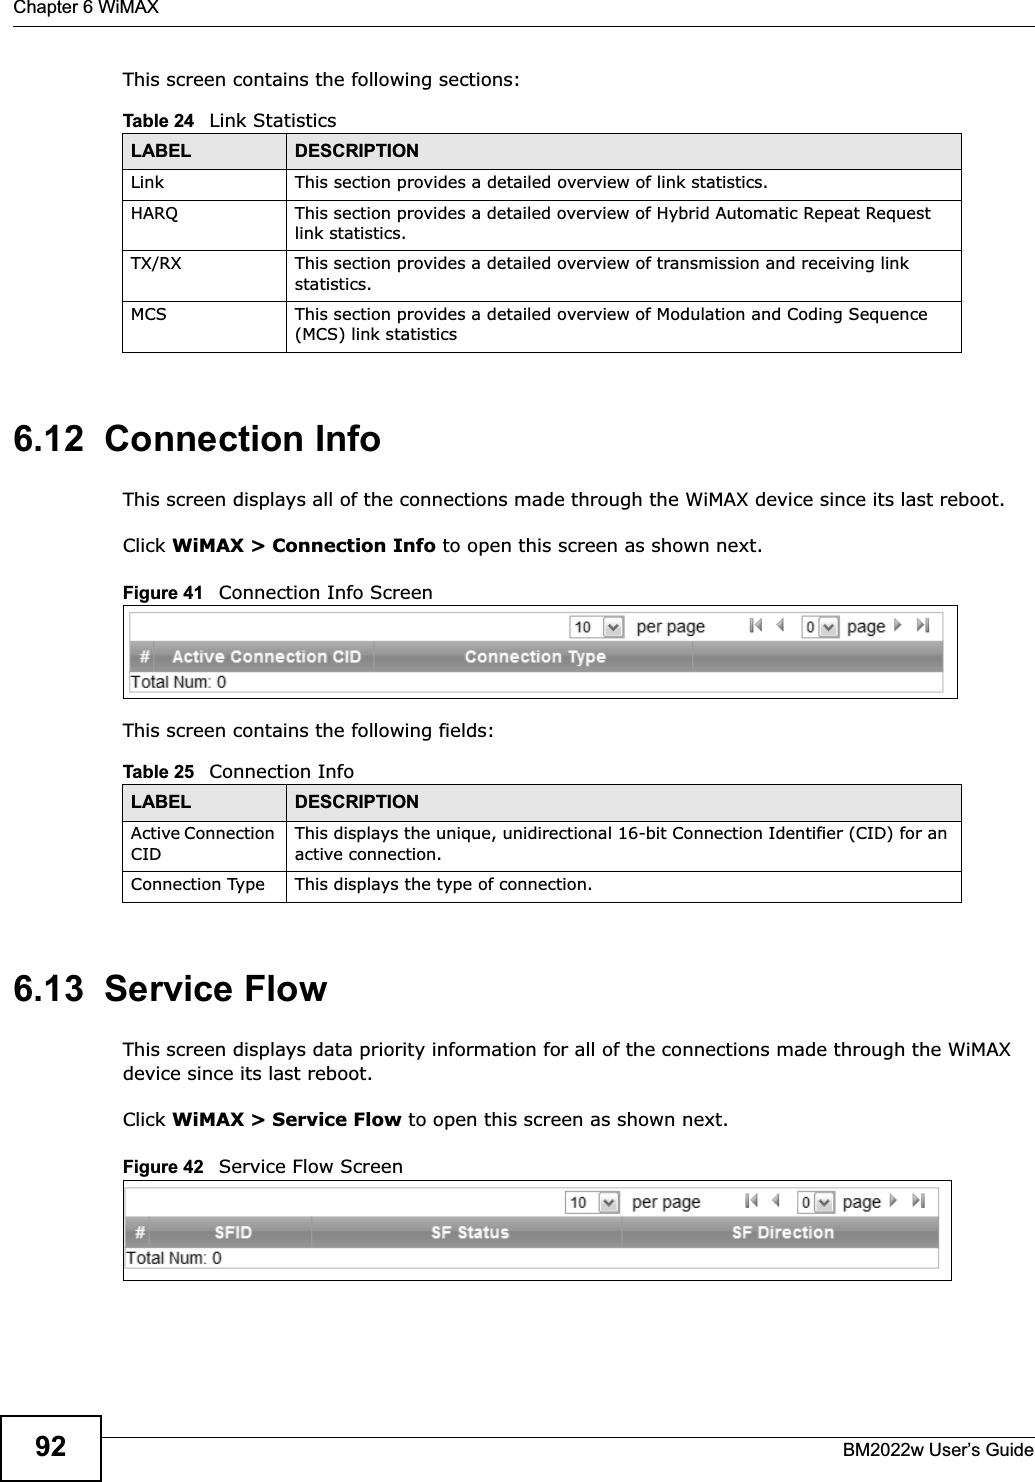 Chapter 6 WiMAXBM2022w User’s Guide92This screen contains the following sections:6.12  Connection InfoThis screen displays all of the connections made through the WiMAX device since its last reboot.Click WiMAX &gt; Connection Info to open this screen as shown next.Figure 41   Connection Info ScreenThis screen contains the following fields:6.13  Service FlowThis screen displays data priority information for all of the connections made through the WiMAX device since its last reboot.Click WiMAX &gt; Service Flow to open this screen as shown next.Figure 42   Service Flow ScreenTable 24   Link StatisticsLABEL DESCRIPTIONLink This section provides a detailed overview of link statistics.HARQ This section provides a detailed overview of Hybrid Automatic Repeat Request link statistics.TX/RX This section provides a detailed overview of transmission and receiving link statistics.MCS This section provides a detailed overview of Modulation and Coding Sequence (MCS) link statisticsTable 25   Connection InfoLABEL DESCRIPTIONActive Connection CIDThis displays the unique, unidirectional 16-bit Connection Identifier (CID) for an active connection.Connection Type This displays the type of connection.